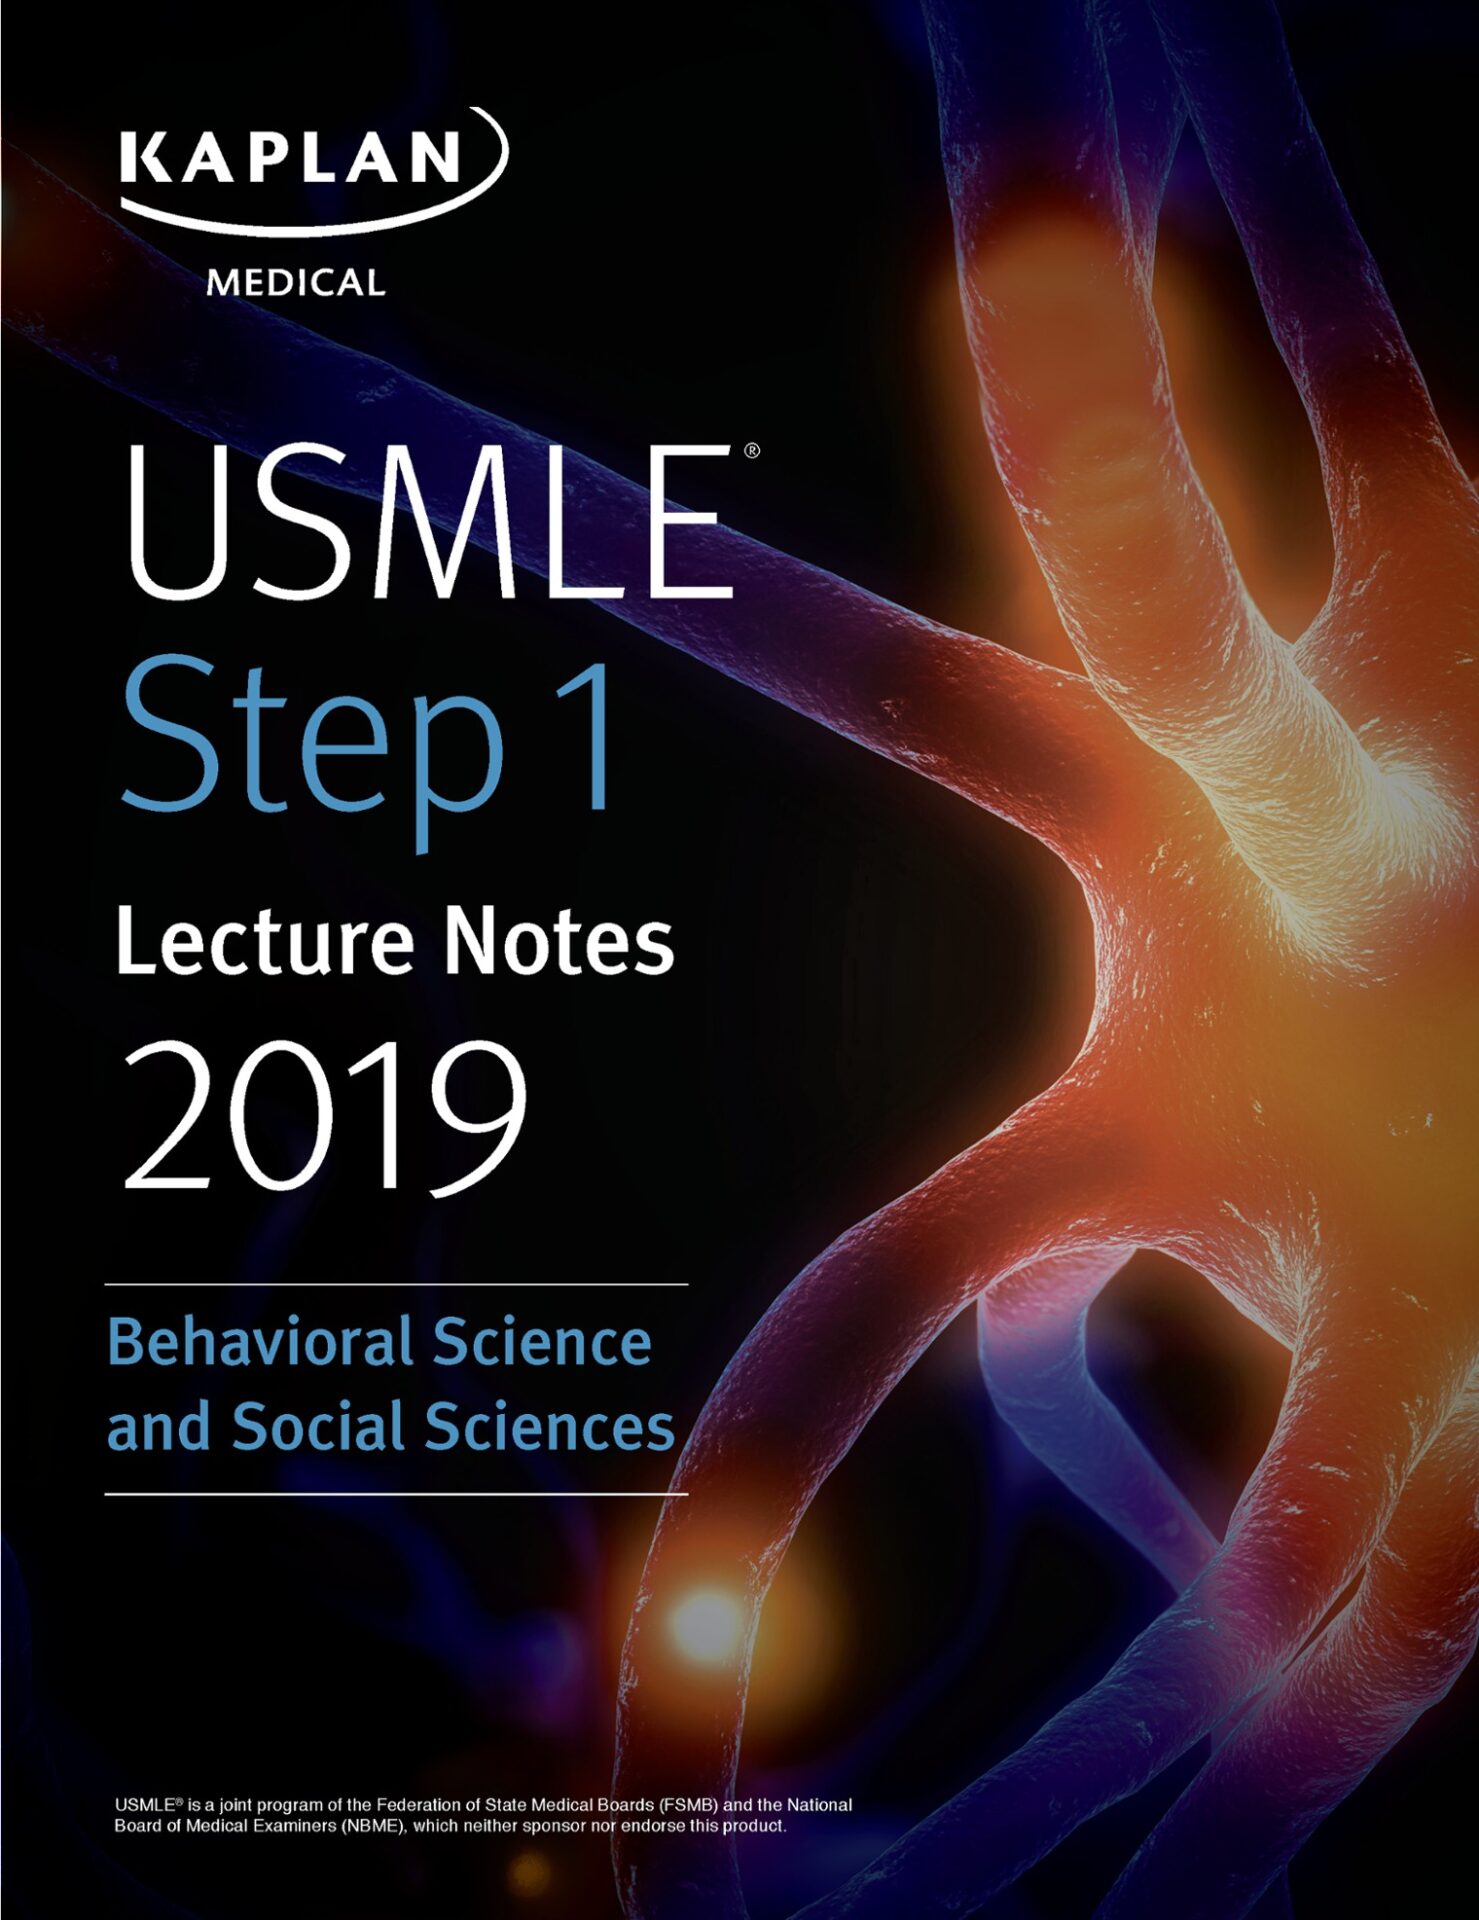 USMLE Step 1 Lecture Notes 2019: Behavioral Science and Social Sciences PDF